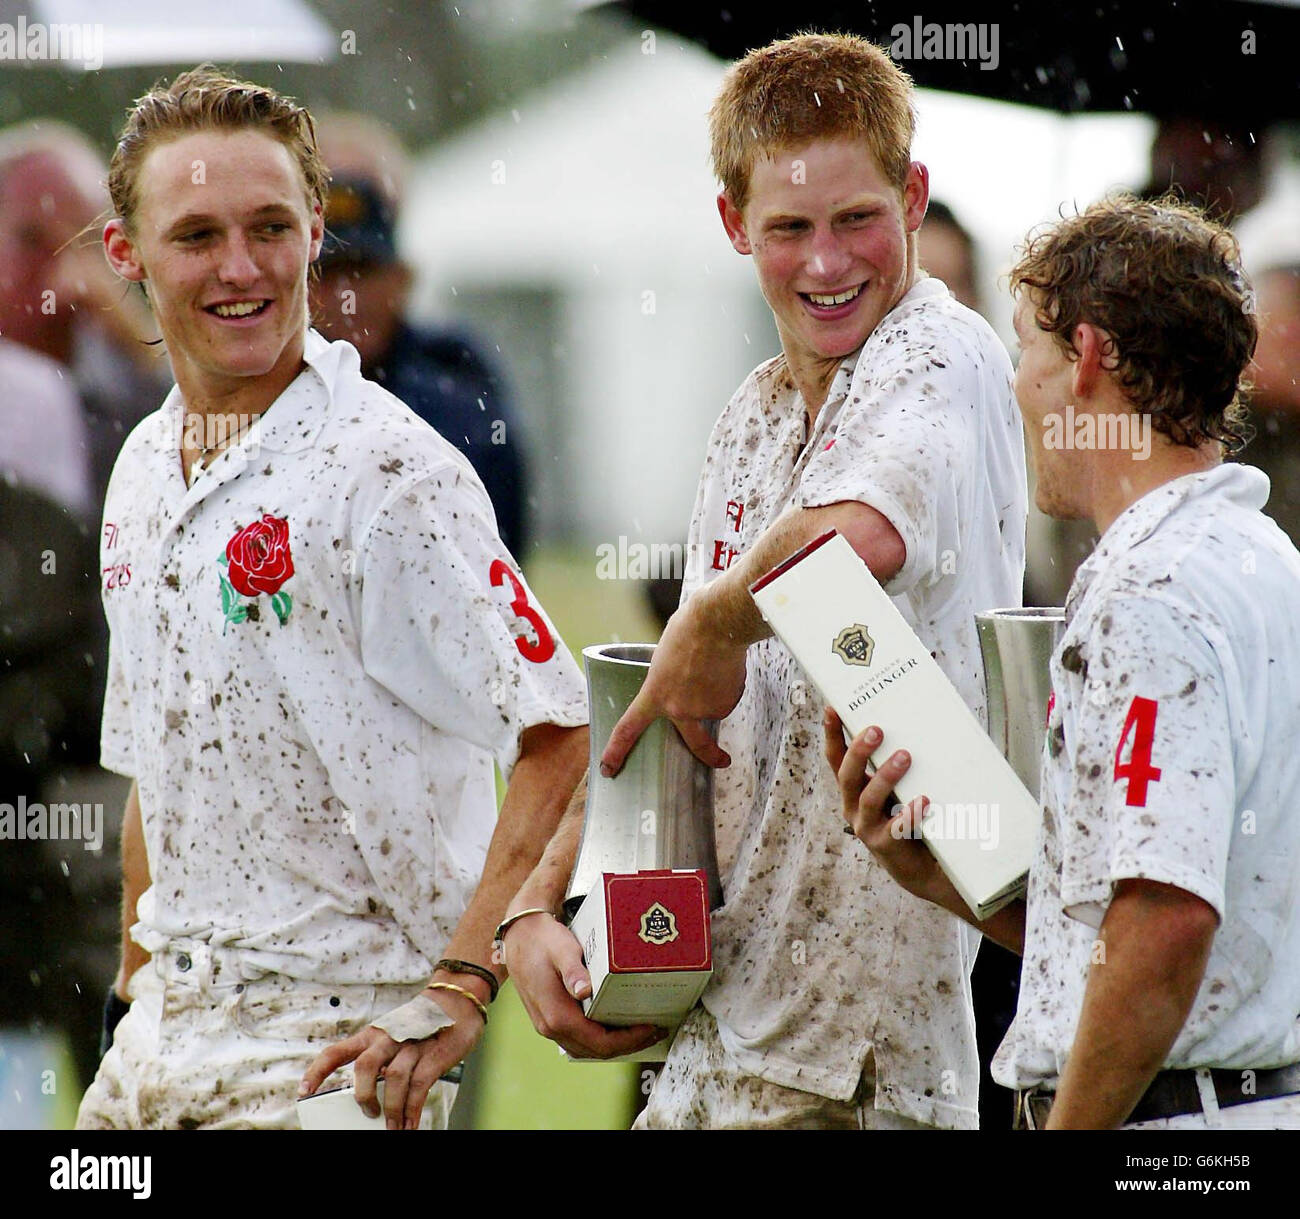 Prince Harry laughs with teammates Mark Tomlinson (left) and John Martin (right) after his Young England team beat Young Australia 6-4 in their Polo test match in Sydney's Richmond district, Australia. Stock Photo